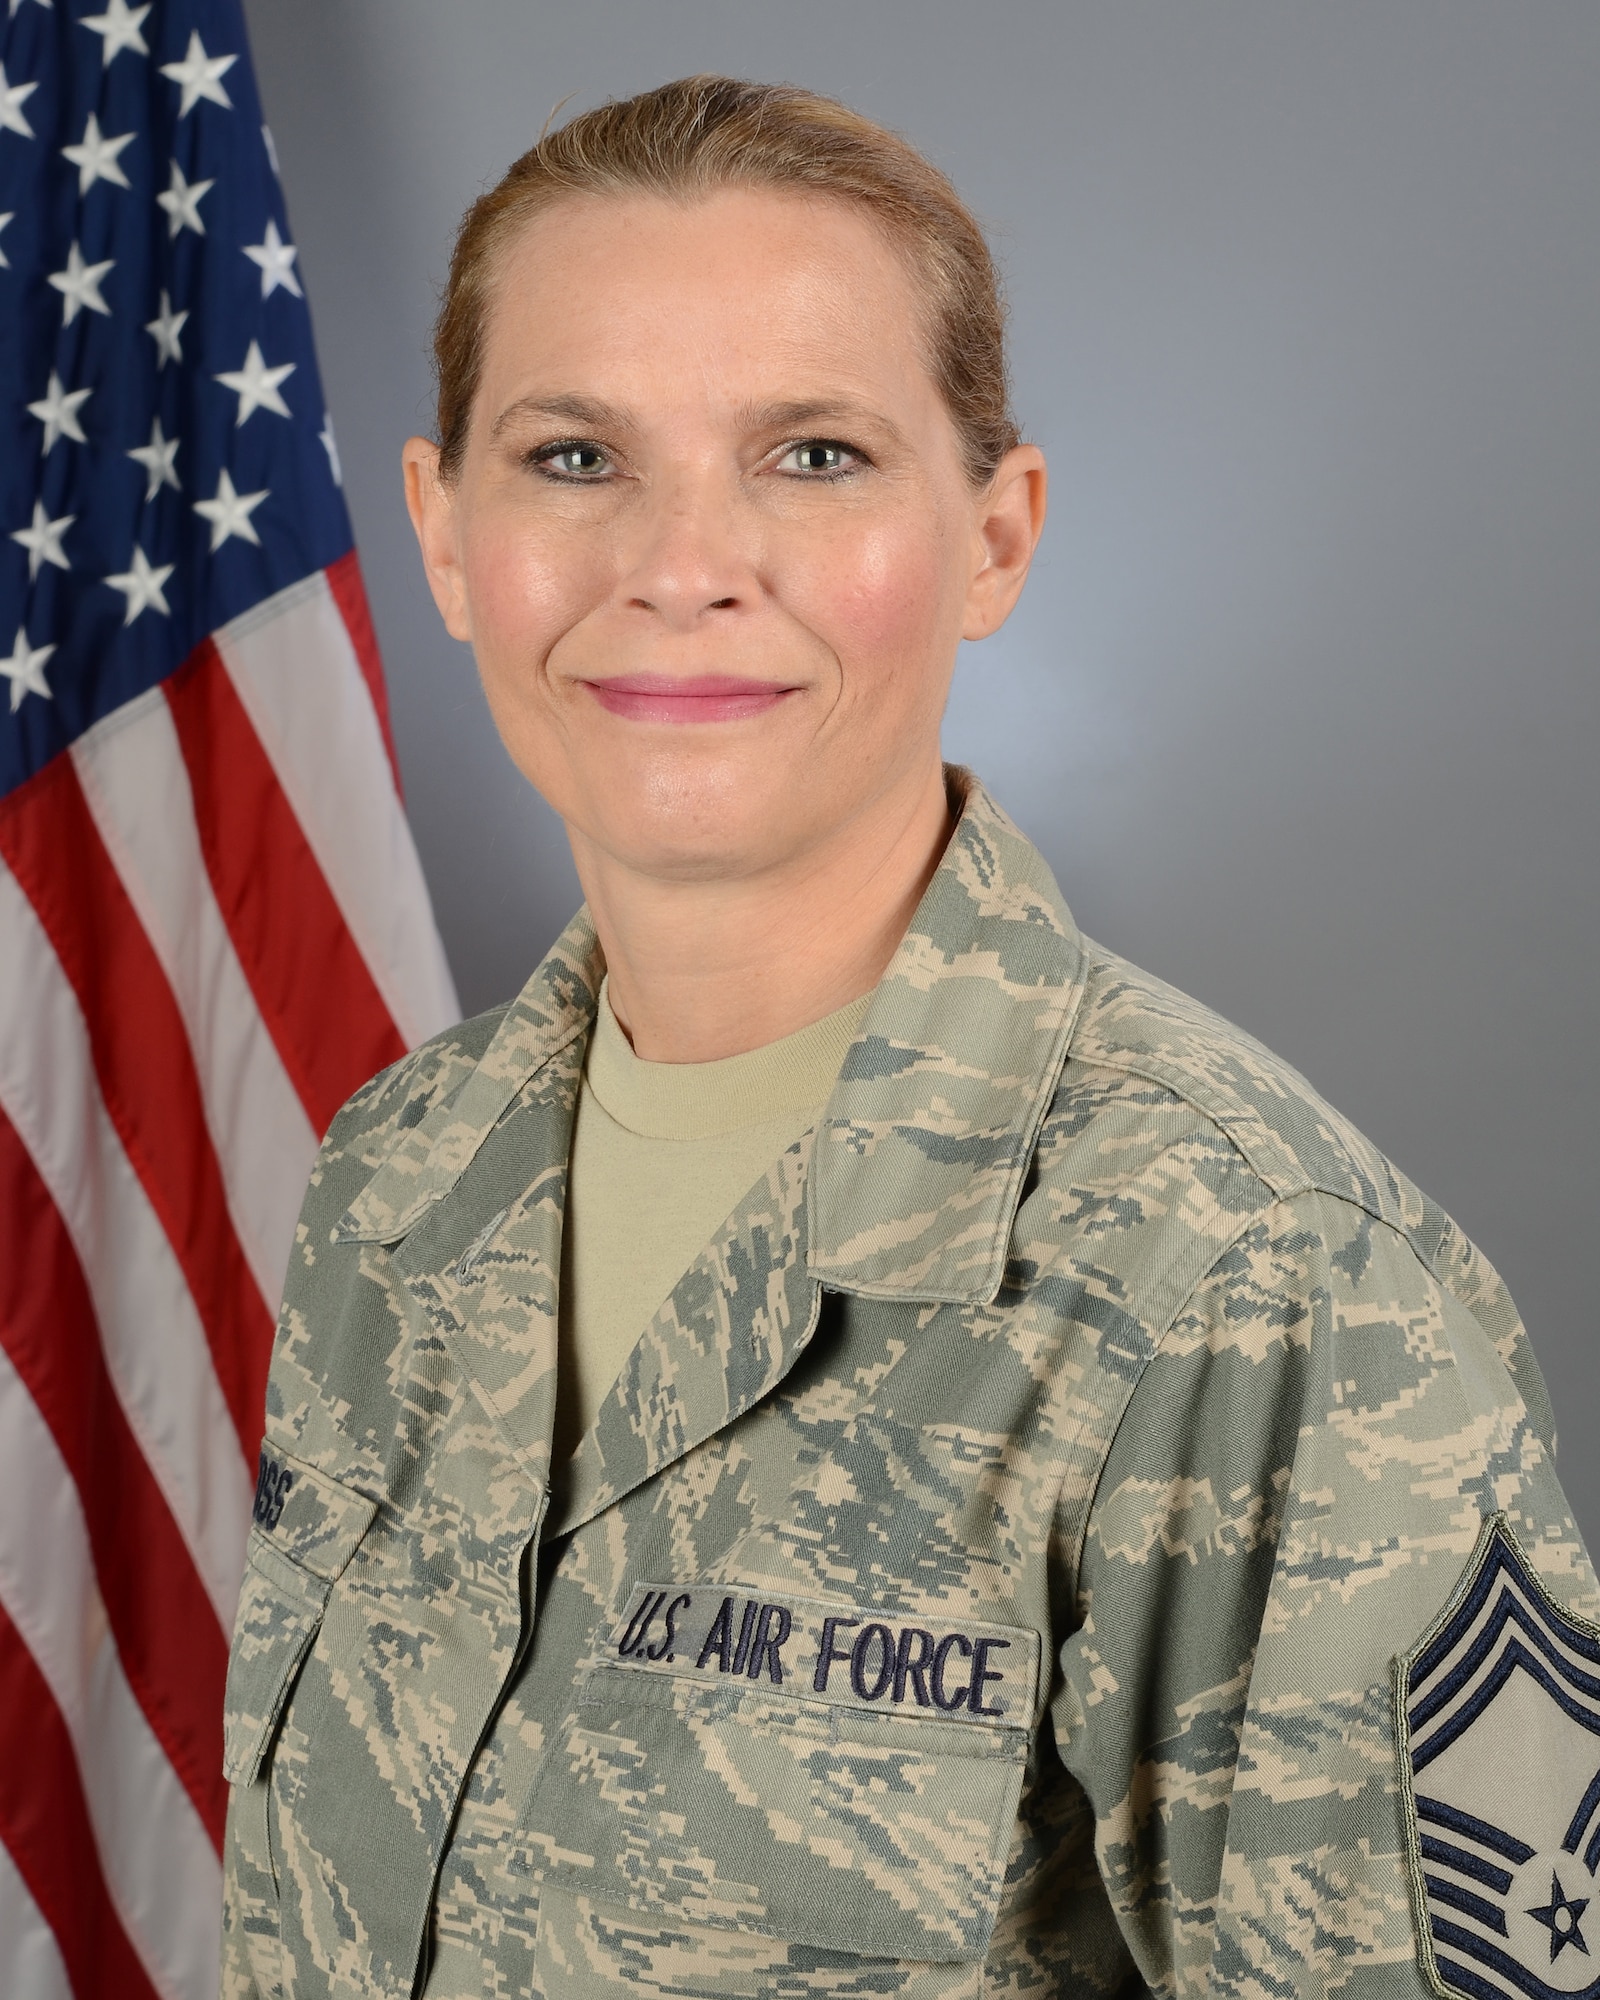 U.S. Air Force Chief Master Sgt. Kellie Foss, the superintendant of 169th Medical Group, at McEntire Joint National Guard Base, S.C, May 6, 2018. (U.S. Air National Guard photo by Senior Airman Megan Floyd